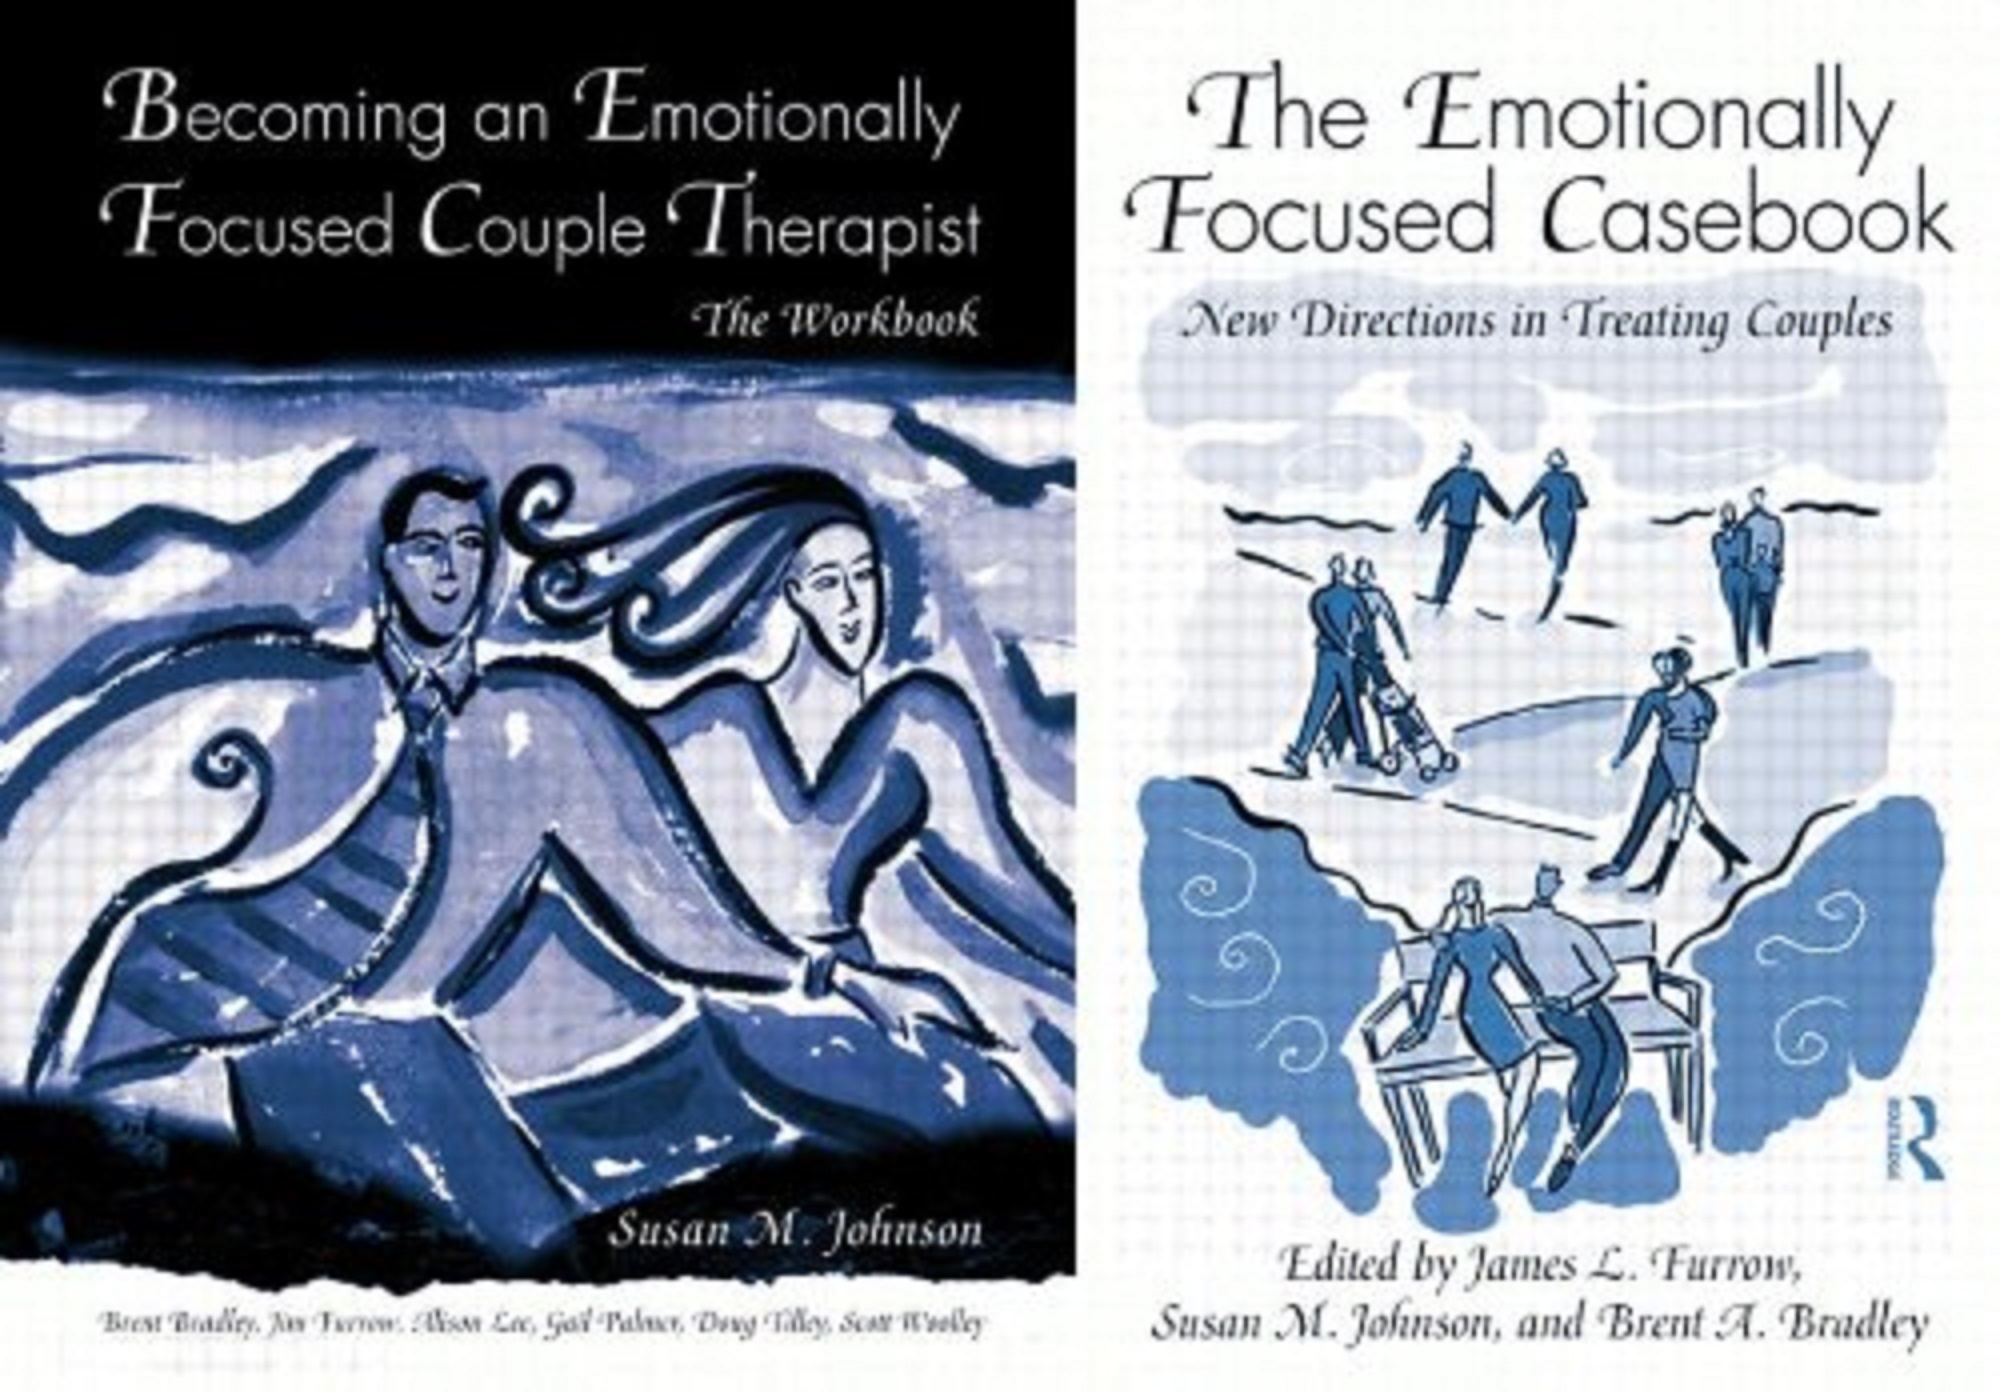 The Emotionally Focused Casebook: New Directions in Treating Couples 